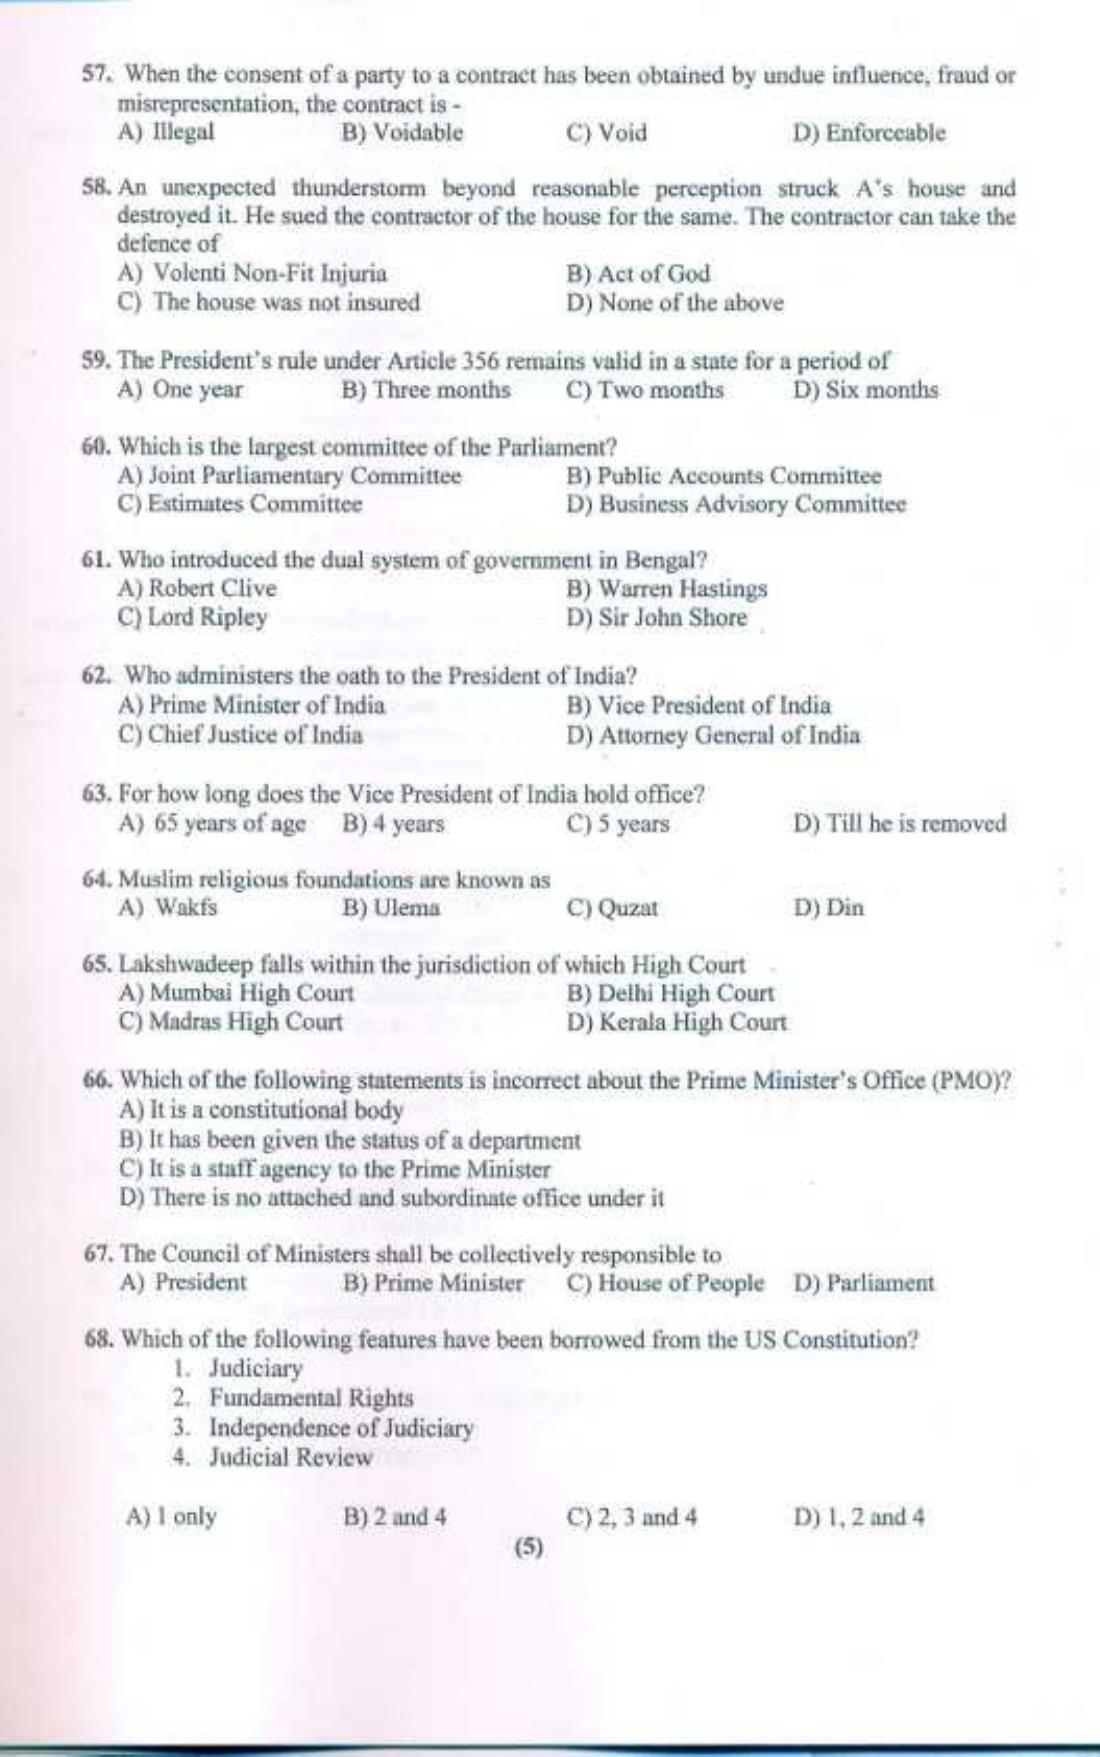 PU LLB 2019 Question Paper - Page 6